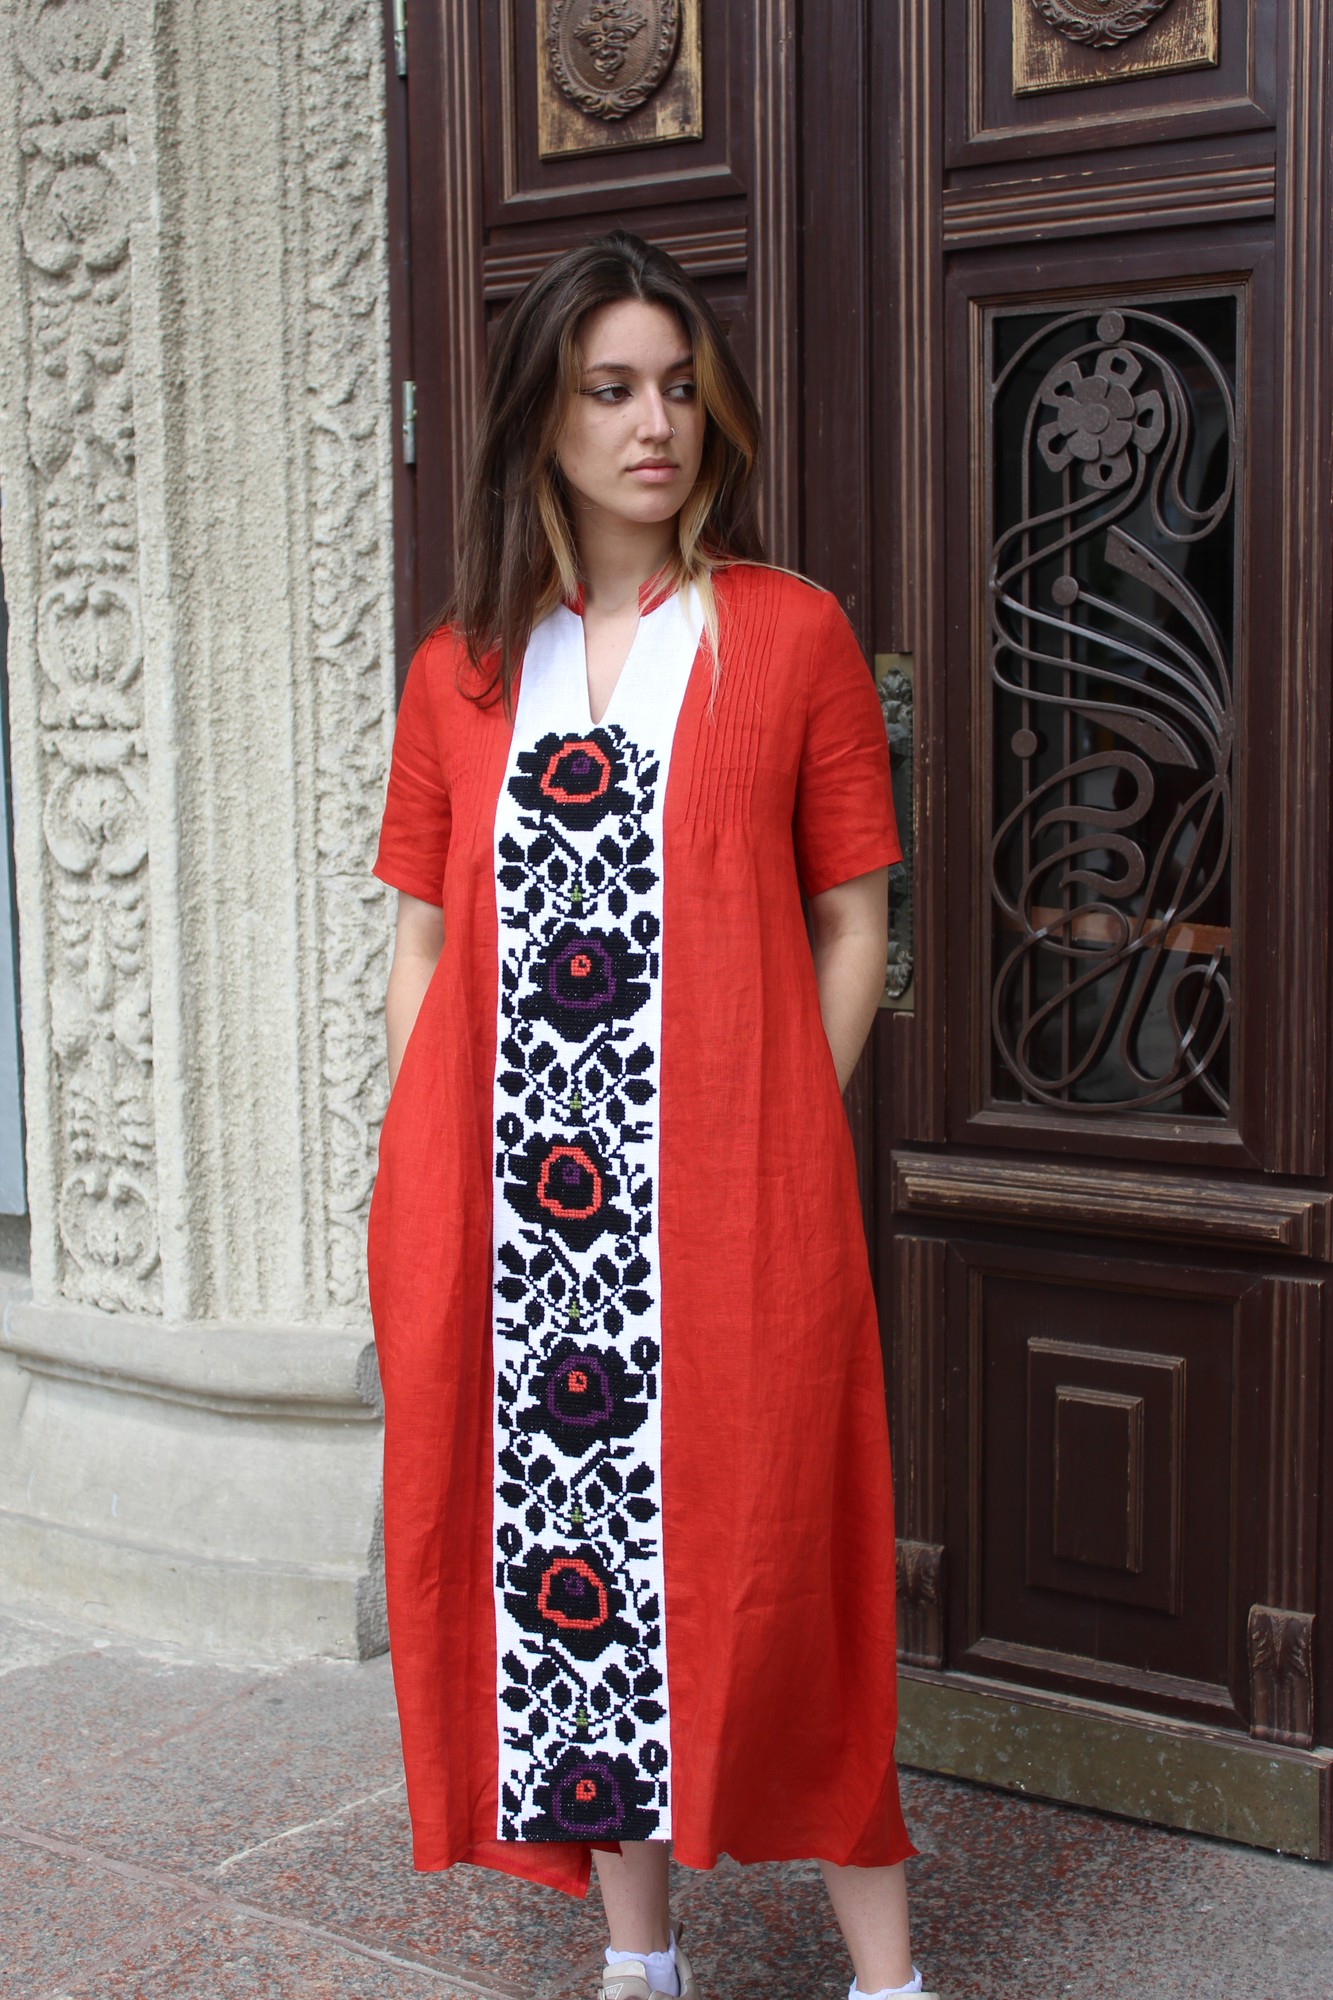 Red lilen dress with flowers (hand embroidery)